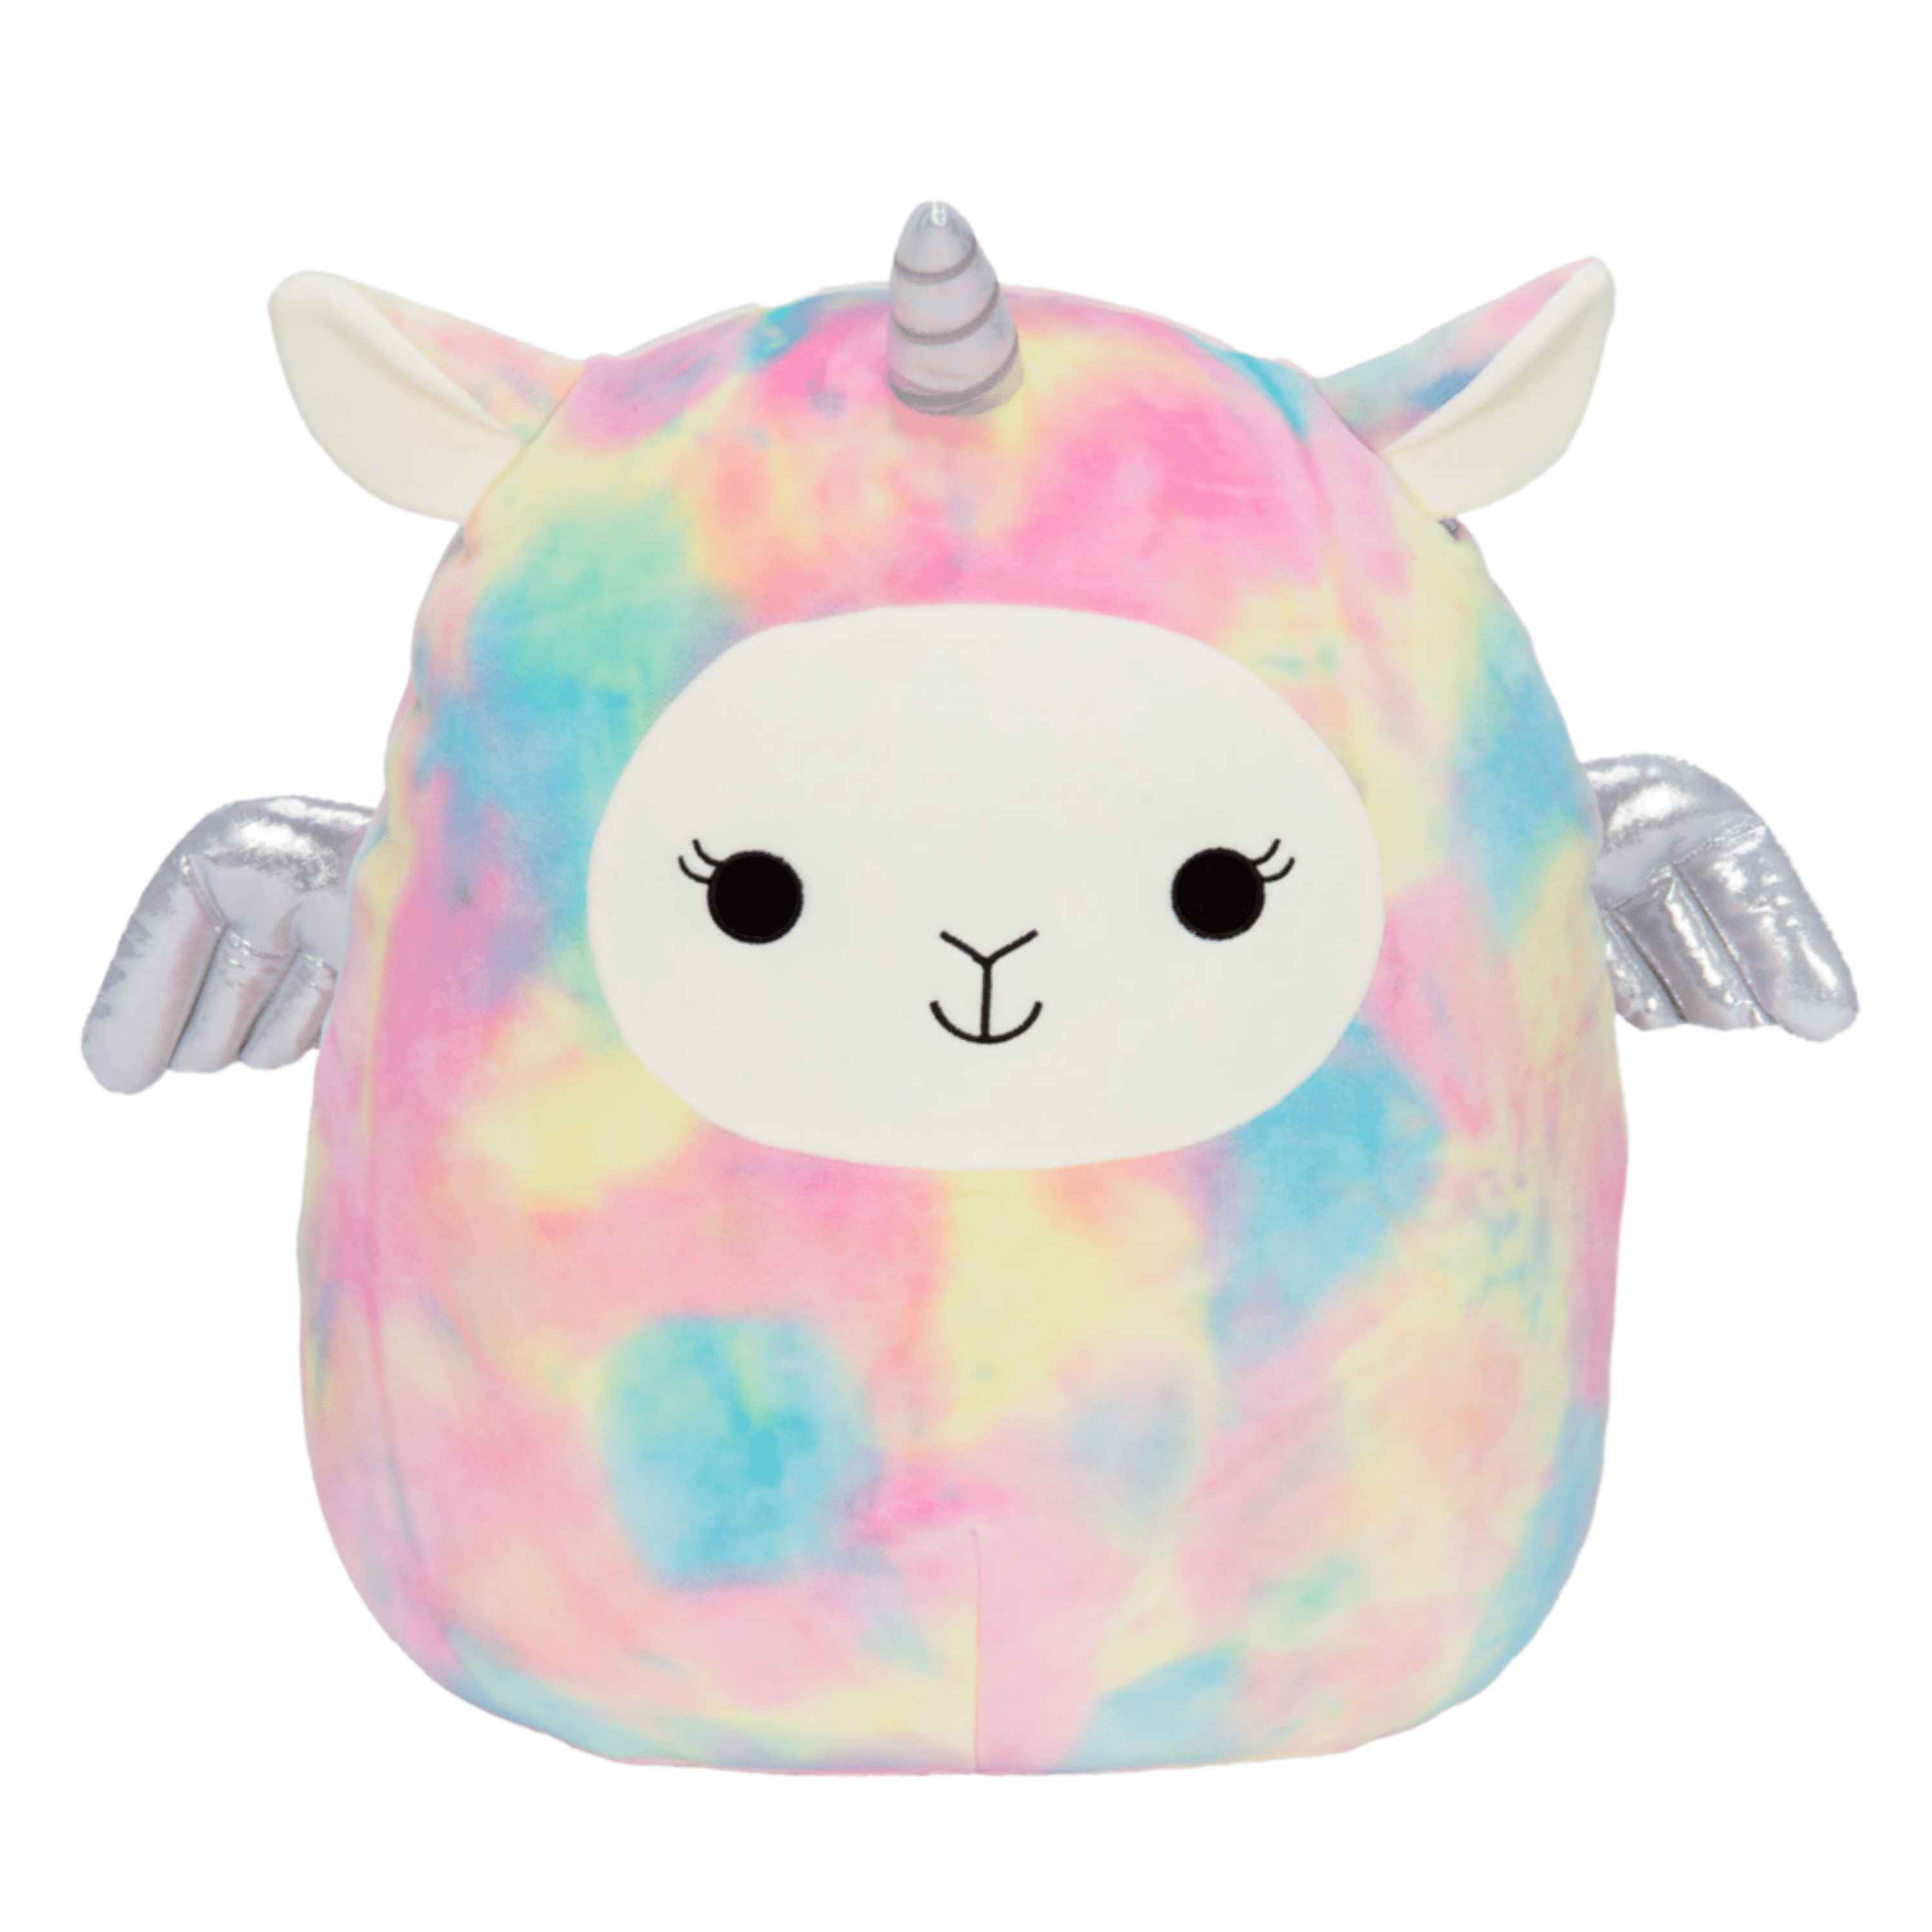 Kellytoy Squishmallows 5" Plush Lucy-may The Winged Llamacorn Easter for sale online